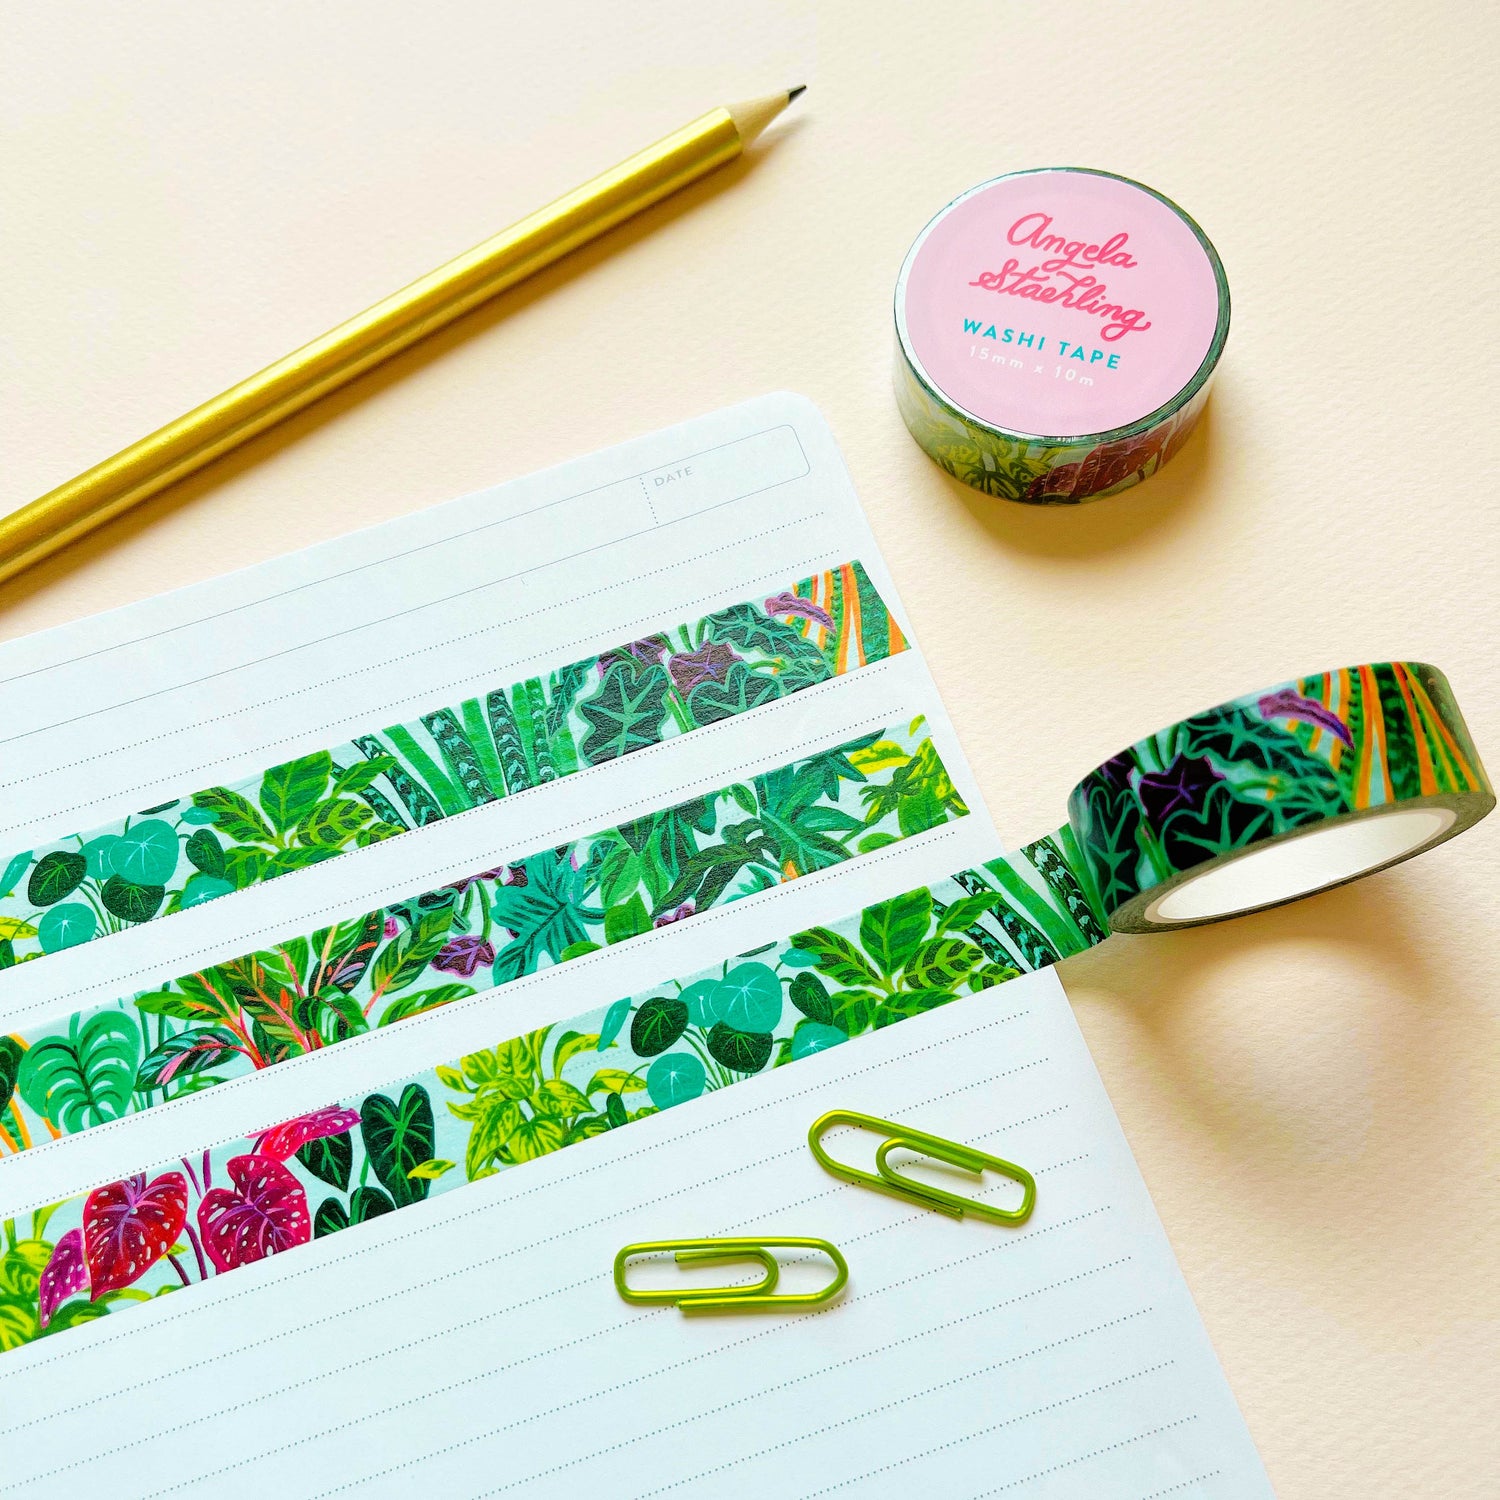 DIY Washi Tape Notebooks and Pencils